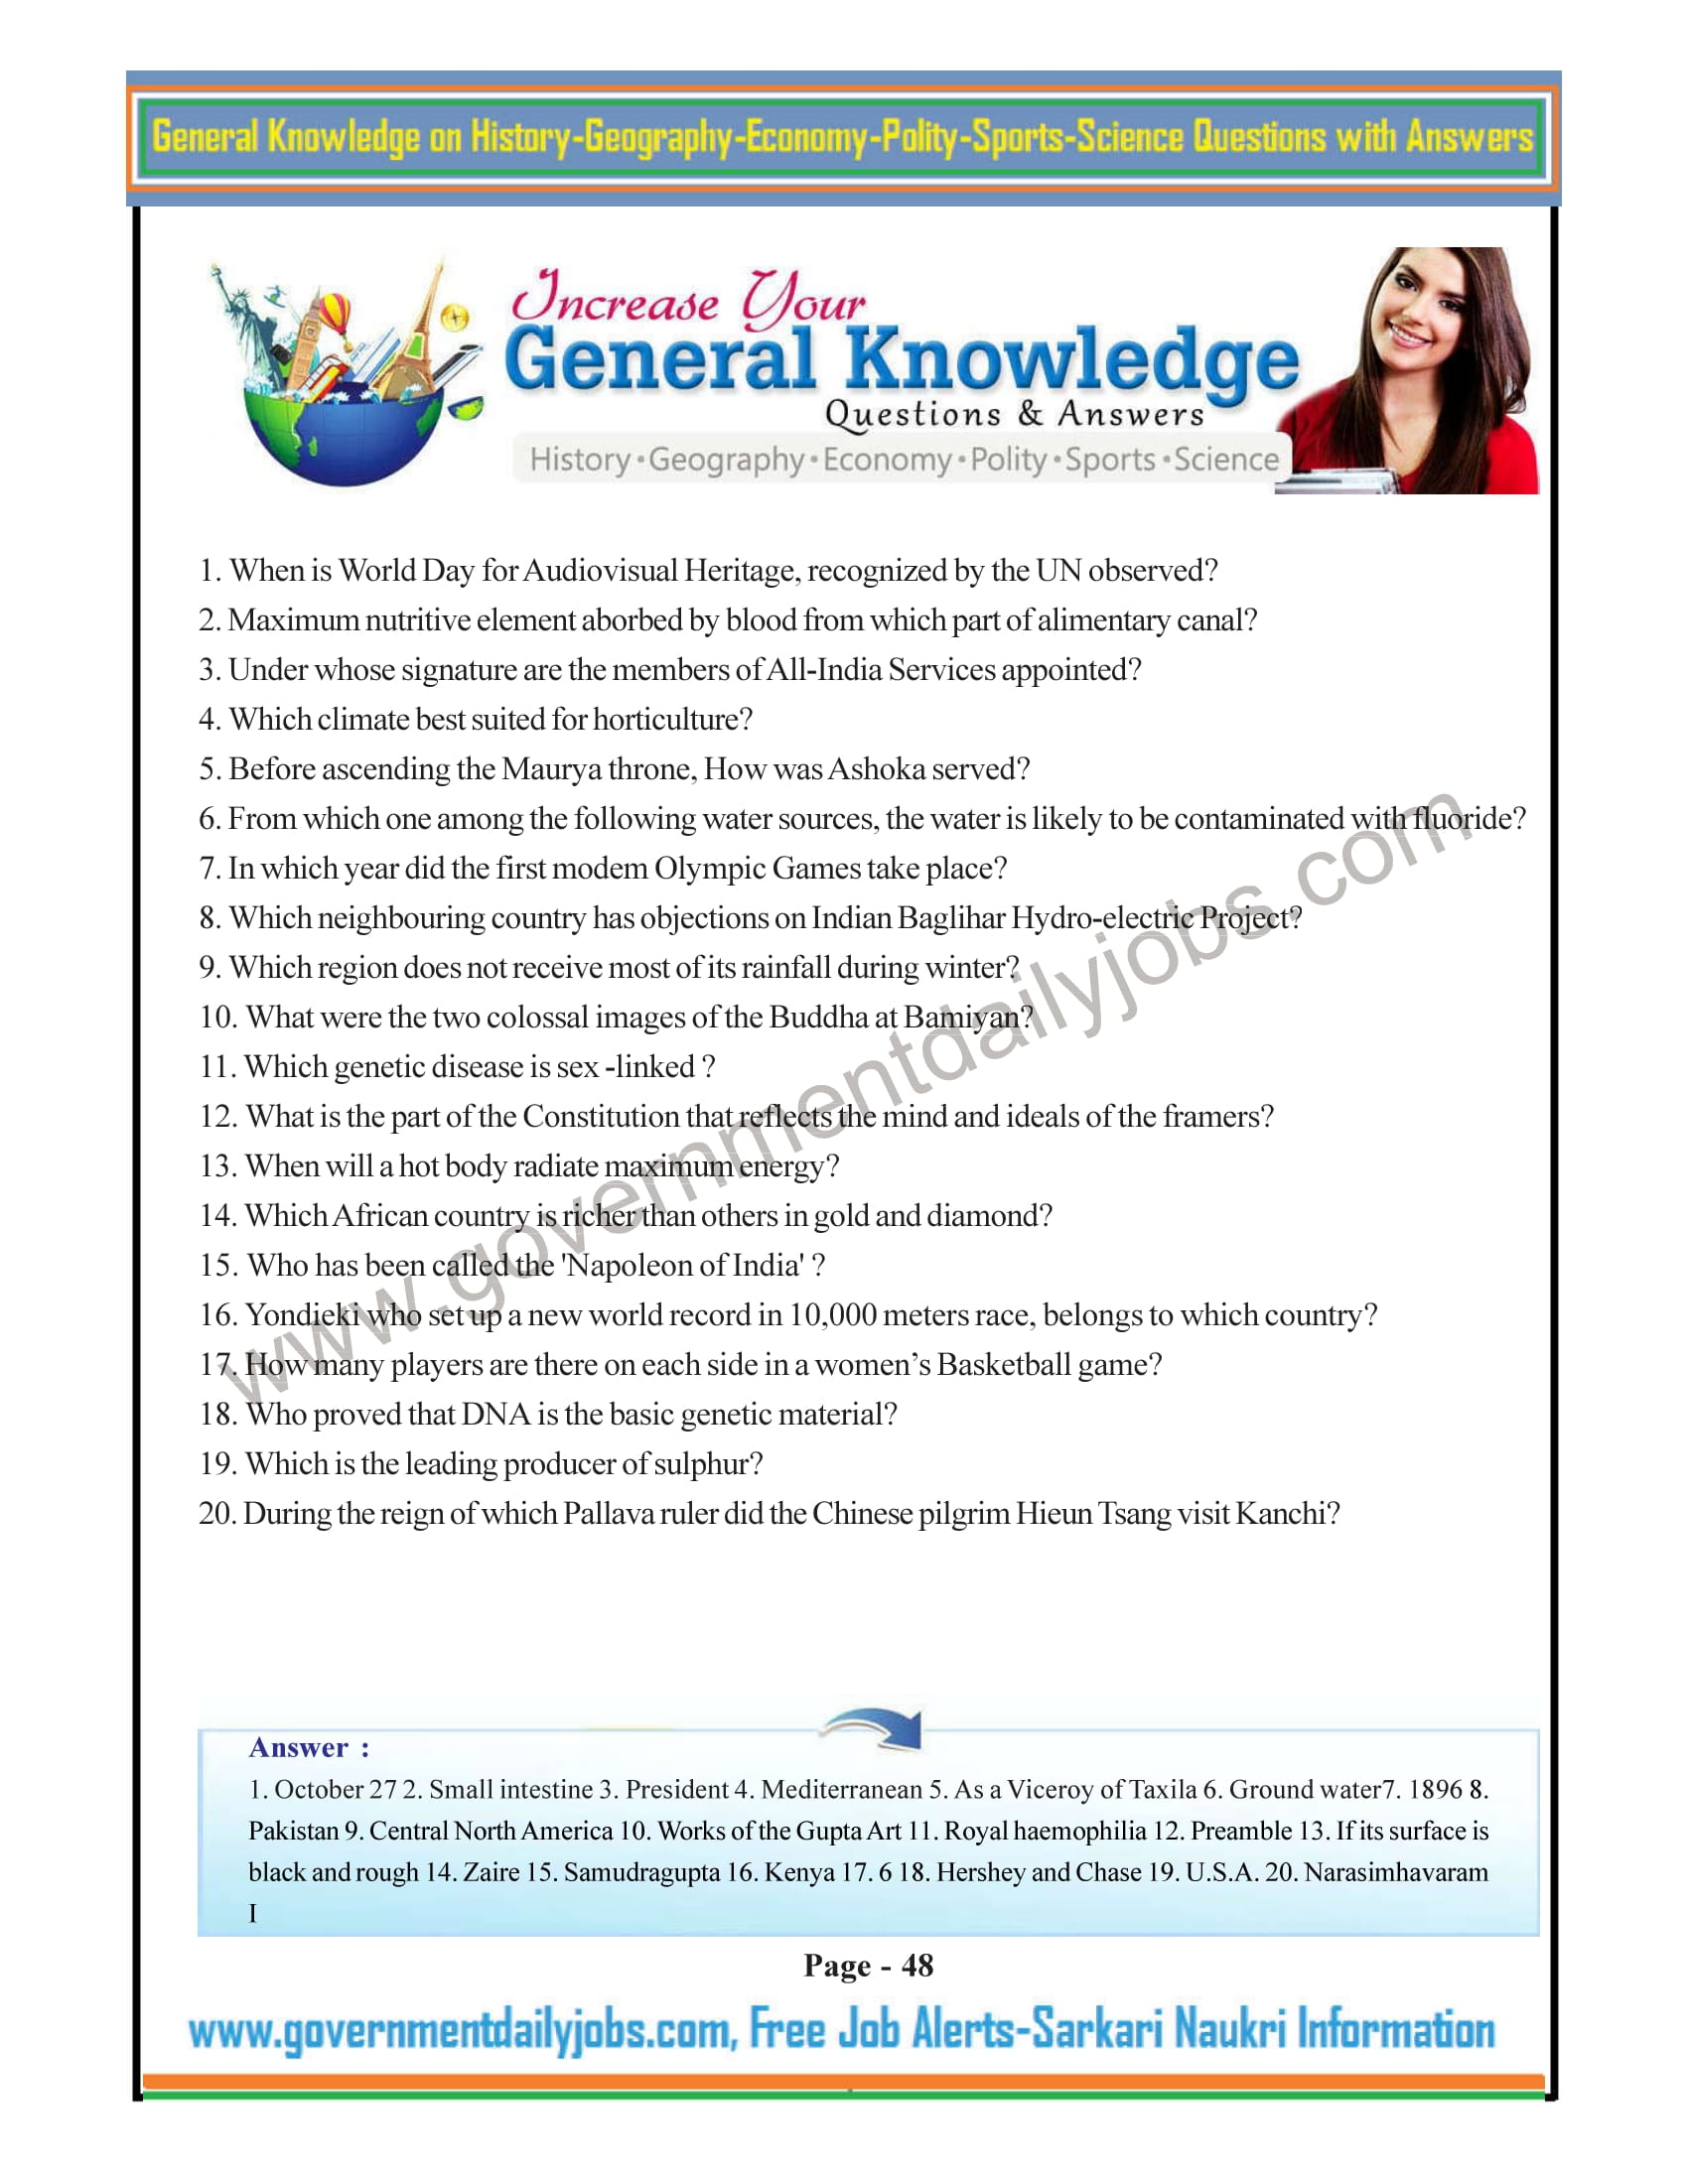 Current General Knowledge Questions and Answers